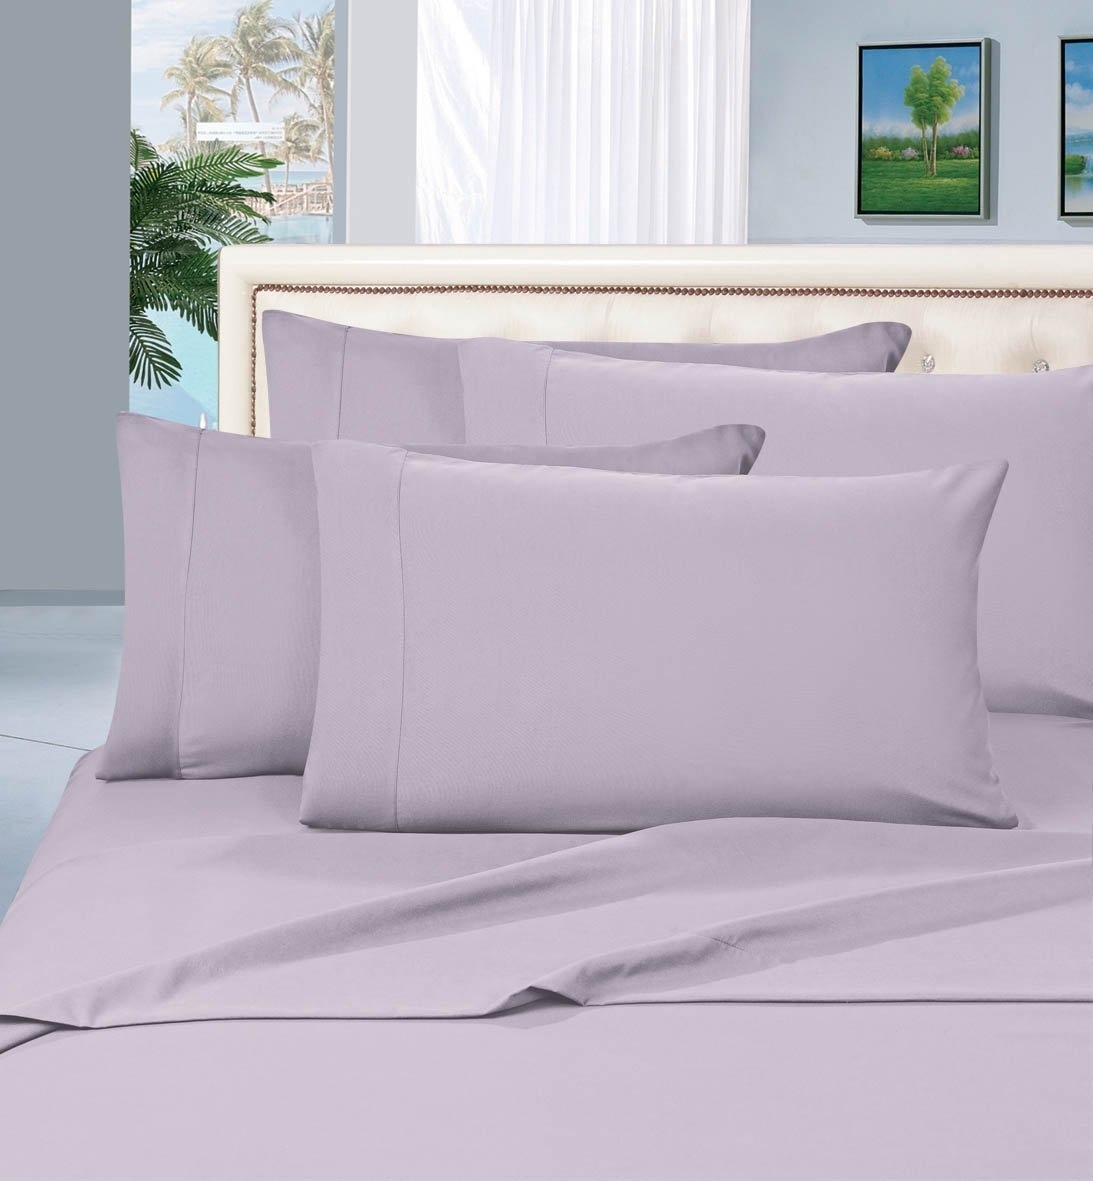 Elegant Comfort 1500 Series Wrinkle Resistant Egyptian Quality Hypoallergenic Ultra Soft Luxury 4-piece Bed Sheet Set, King, Lilac